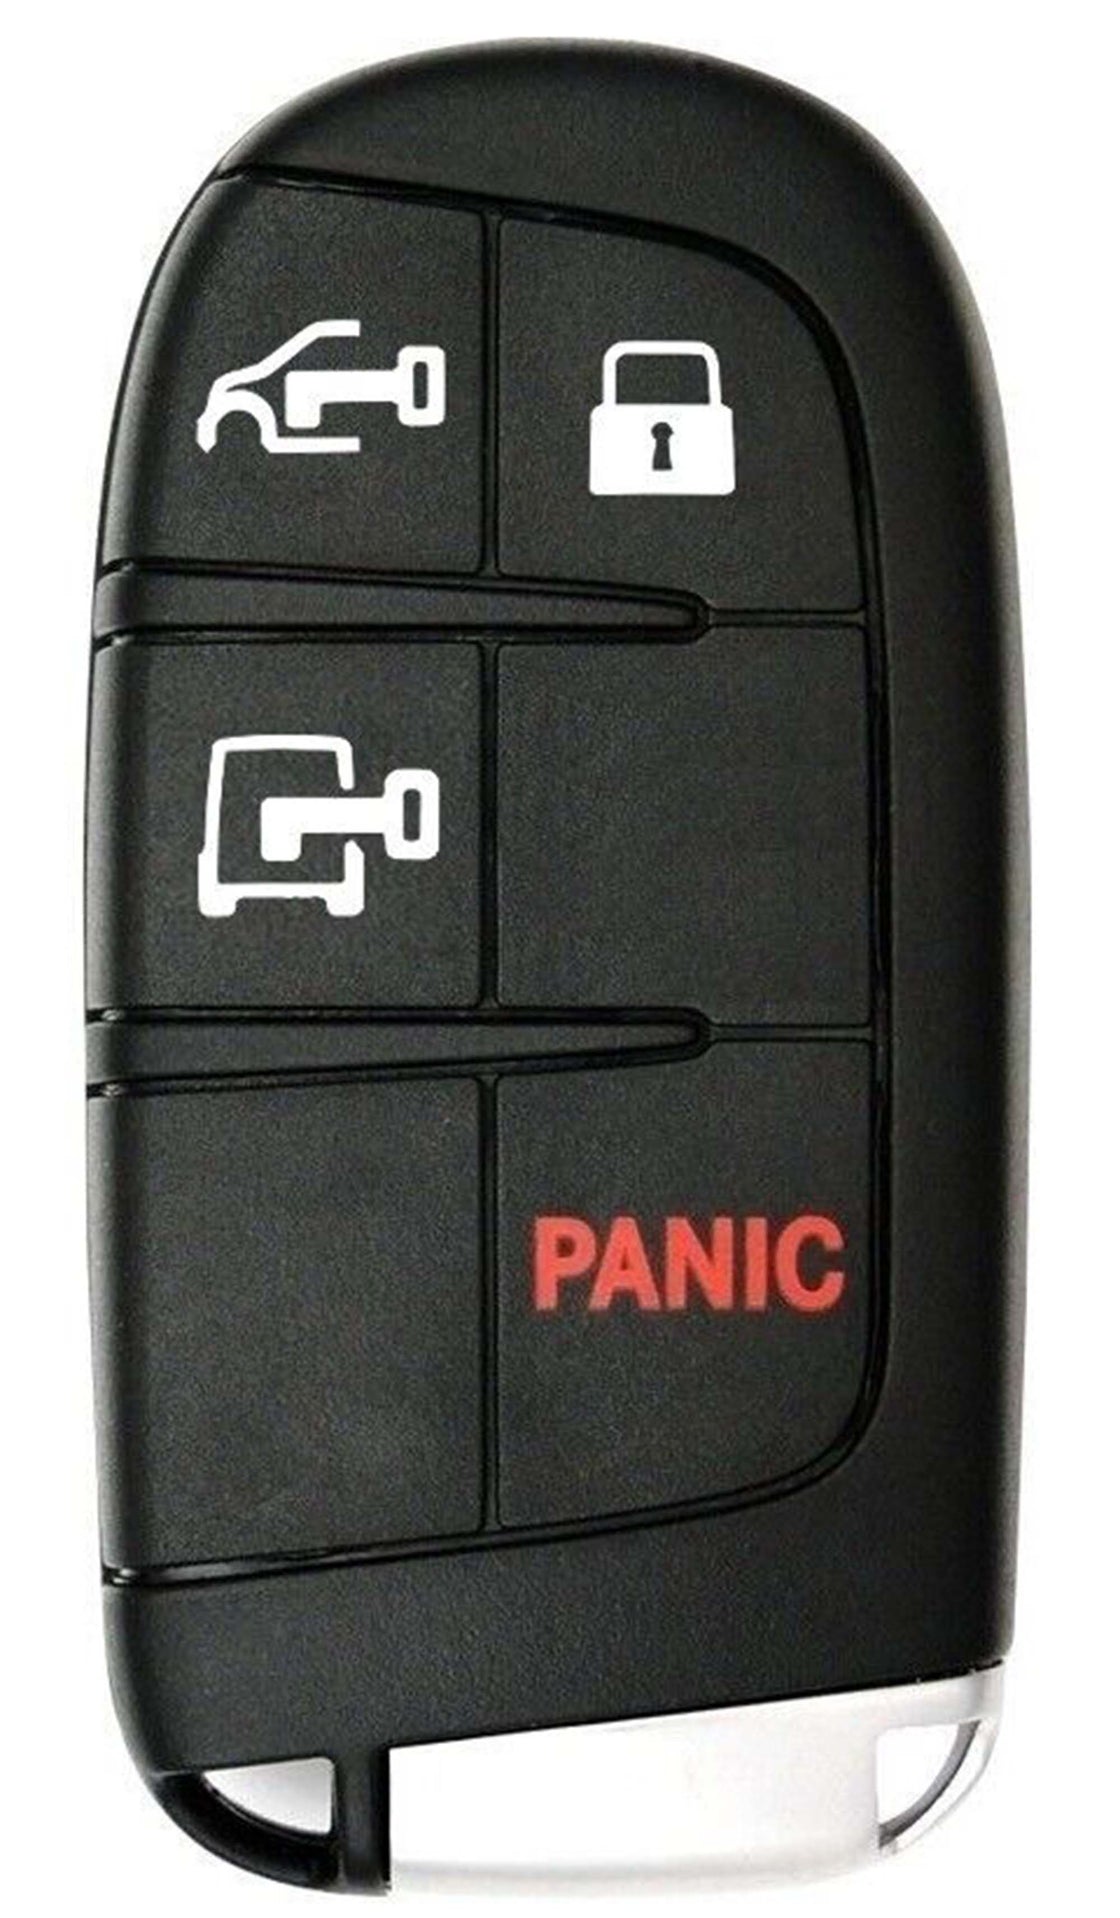 2023 Ram ProMaster 1500 Replacement Key Fob Remote